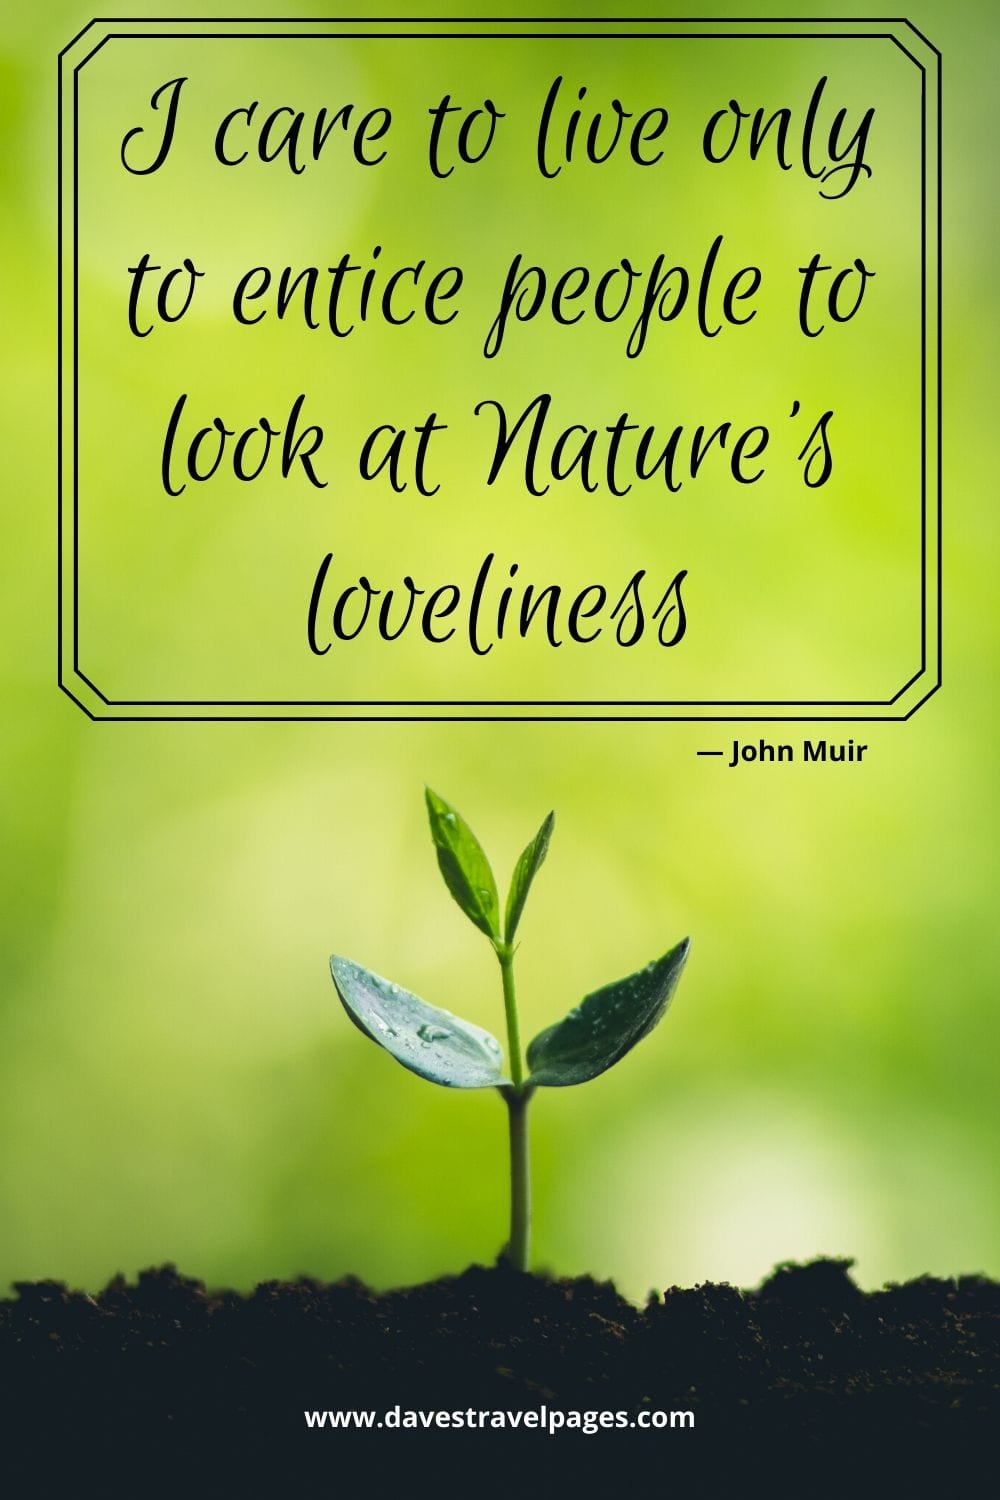 Nature Quotes - “I care to live only to entice people to look at Nature’s loveliness.” ― John Muir